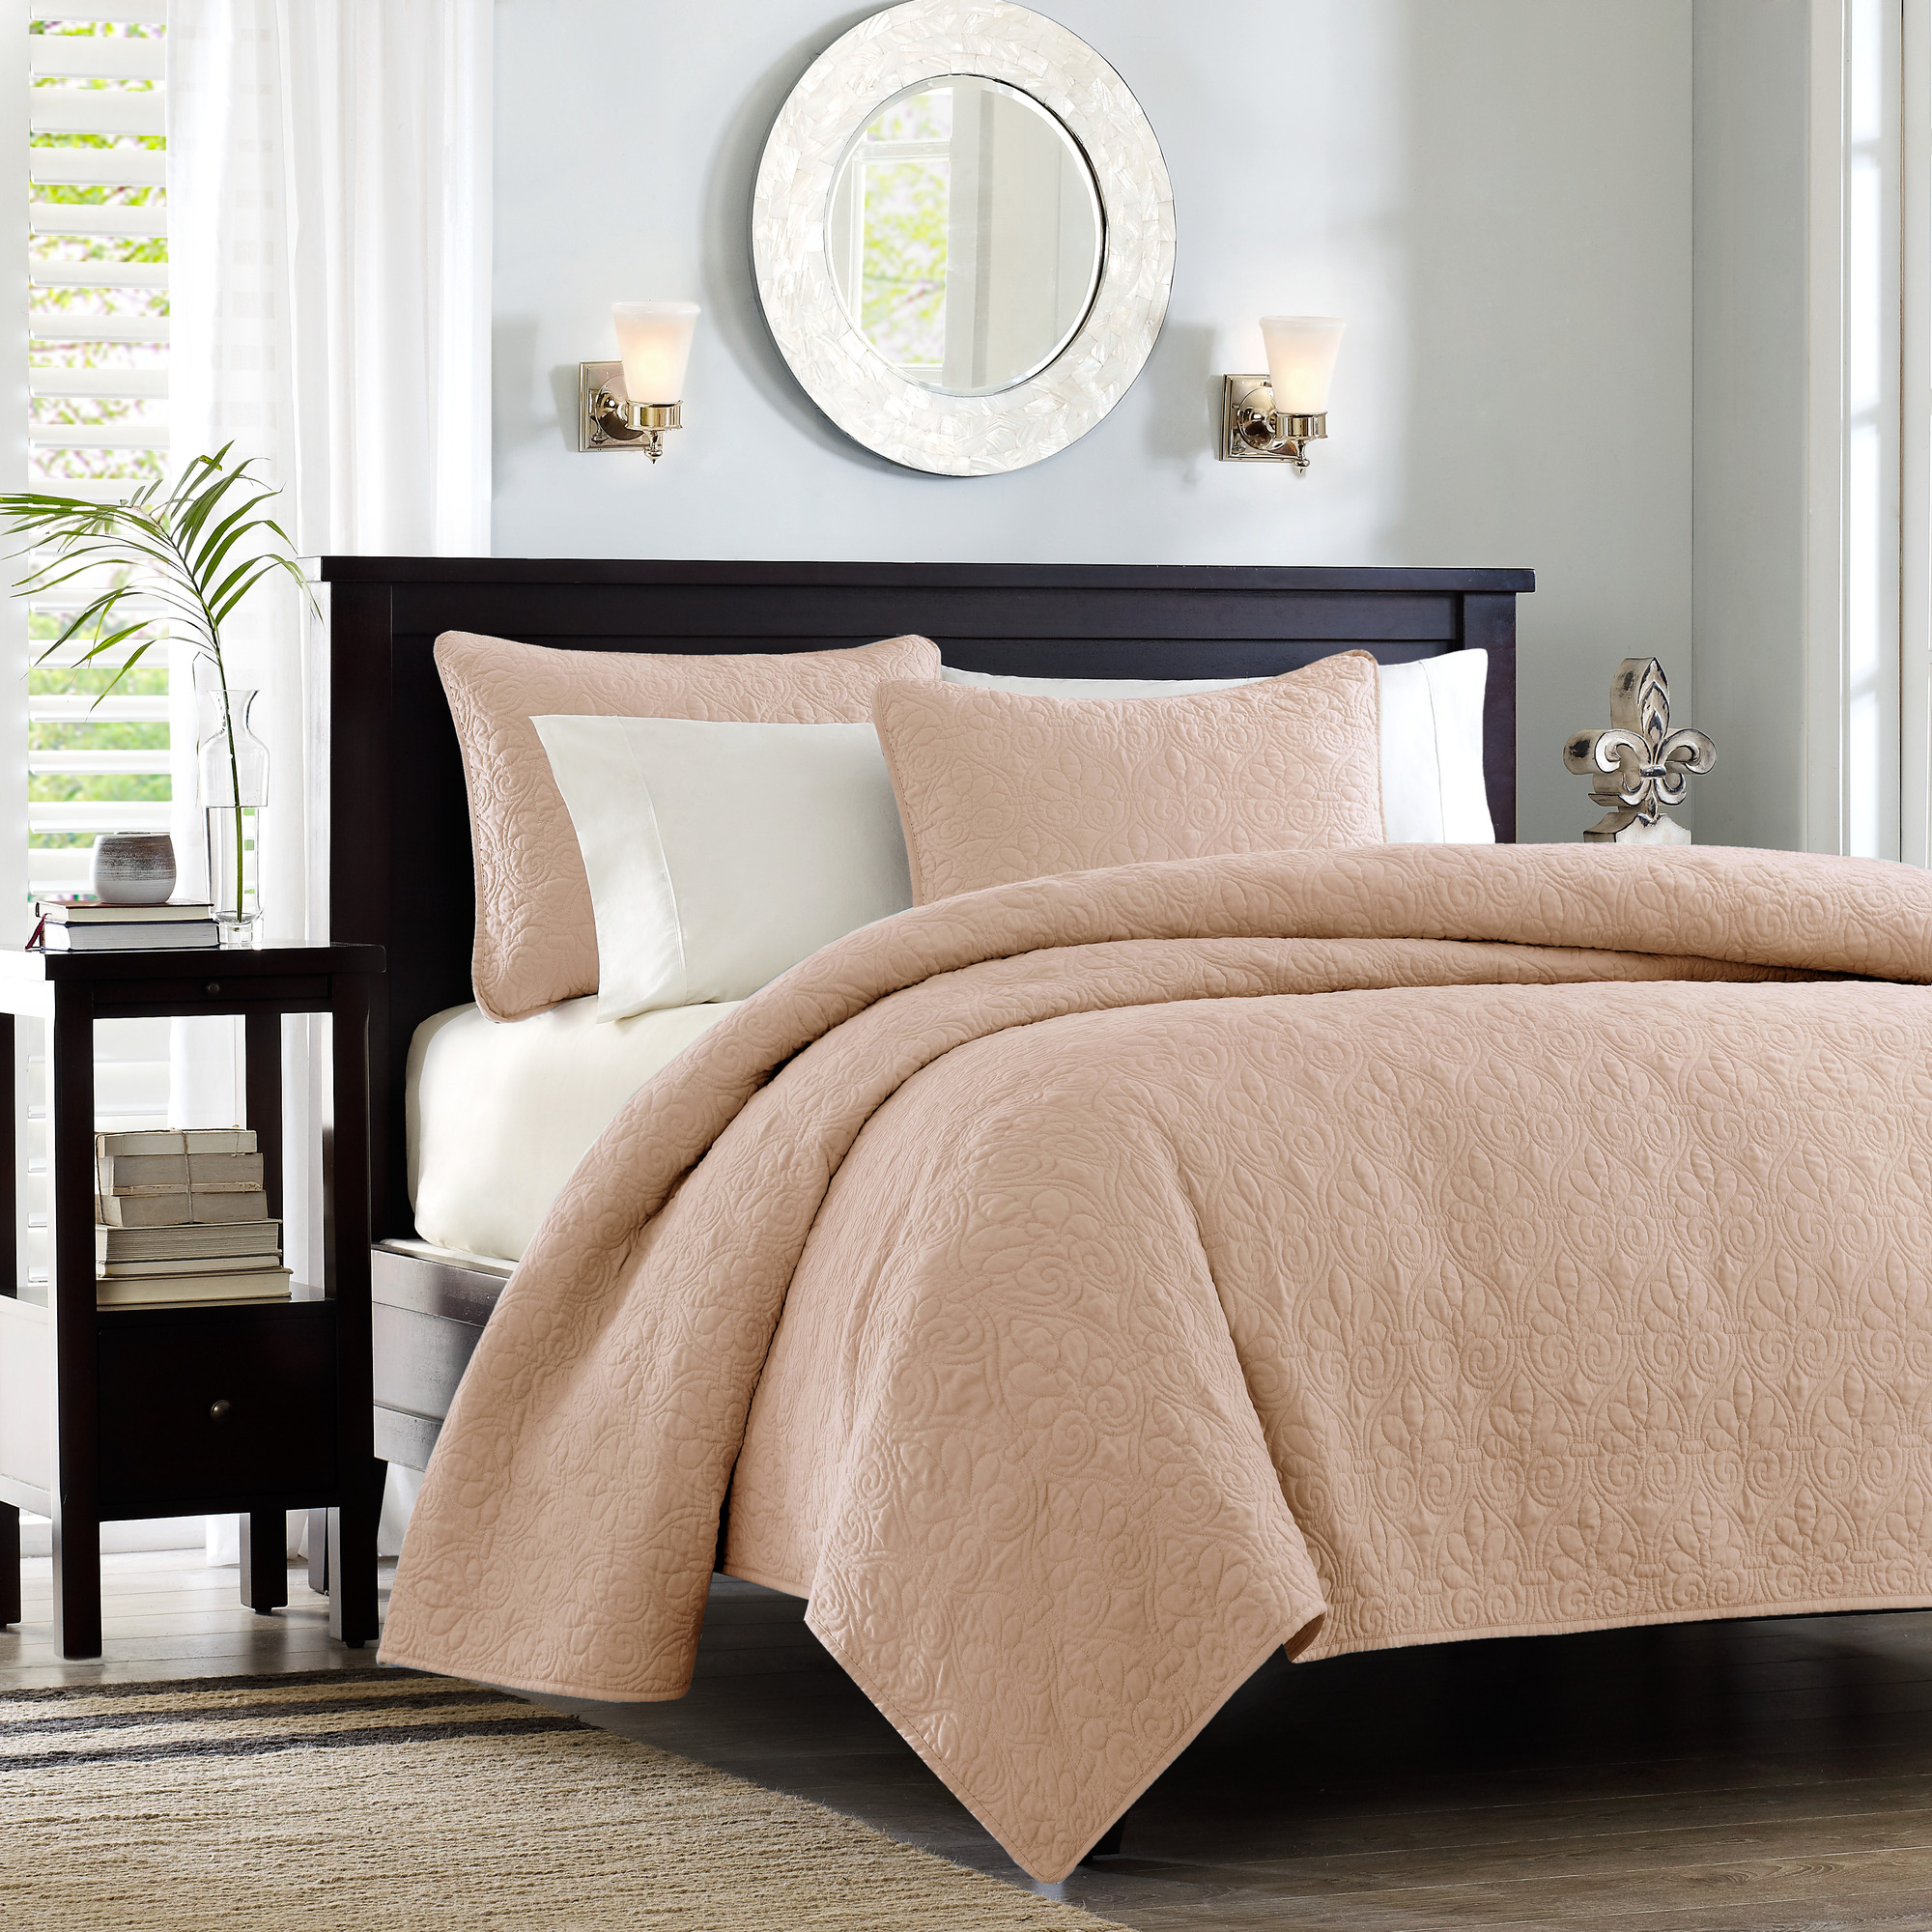 Home Essence Vancouver Super Soft Reversible Coverlet Set, Twin/Twin XL, Blush - image 1 of 13